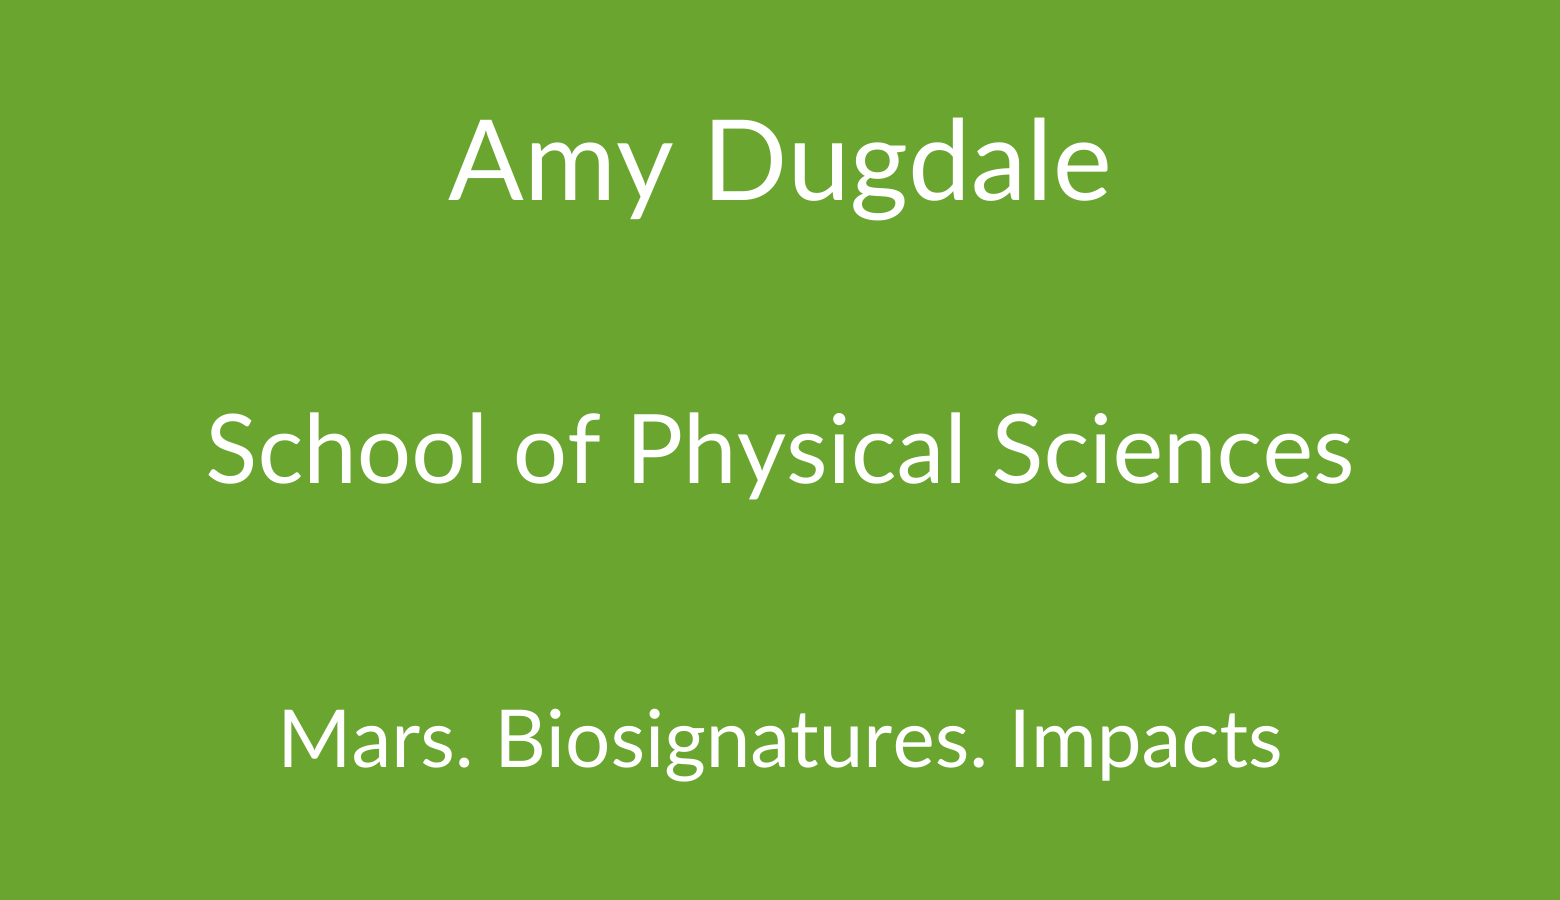 Amy Dugdale. School of Physical Sciences. Mars. Biomarkers. Impacts.